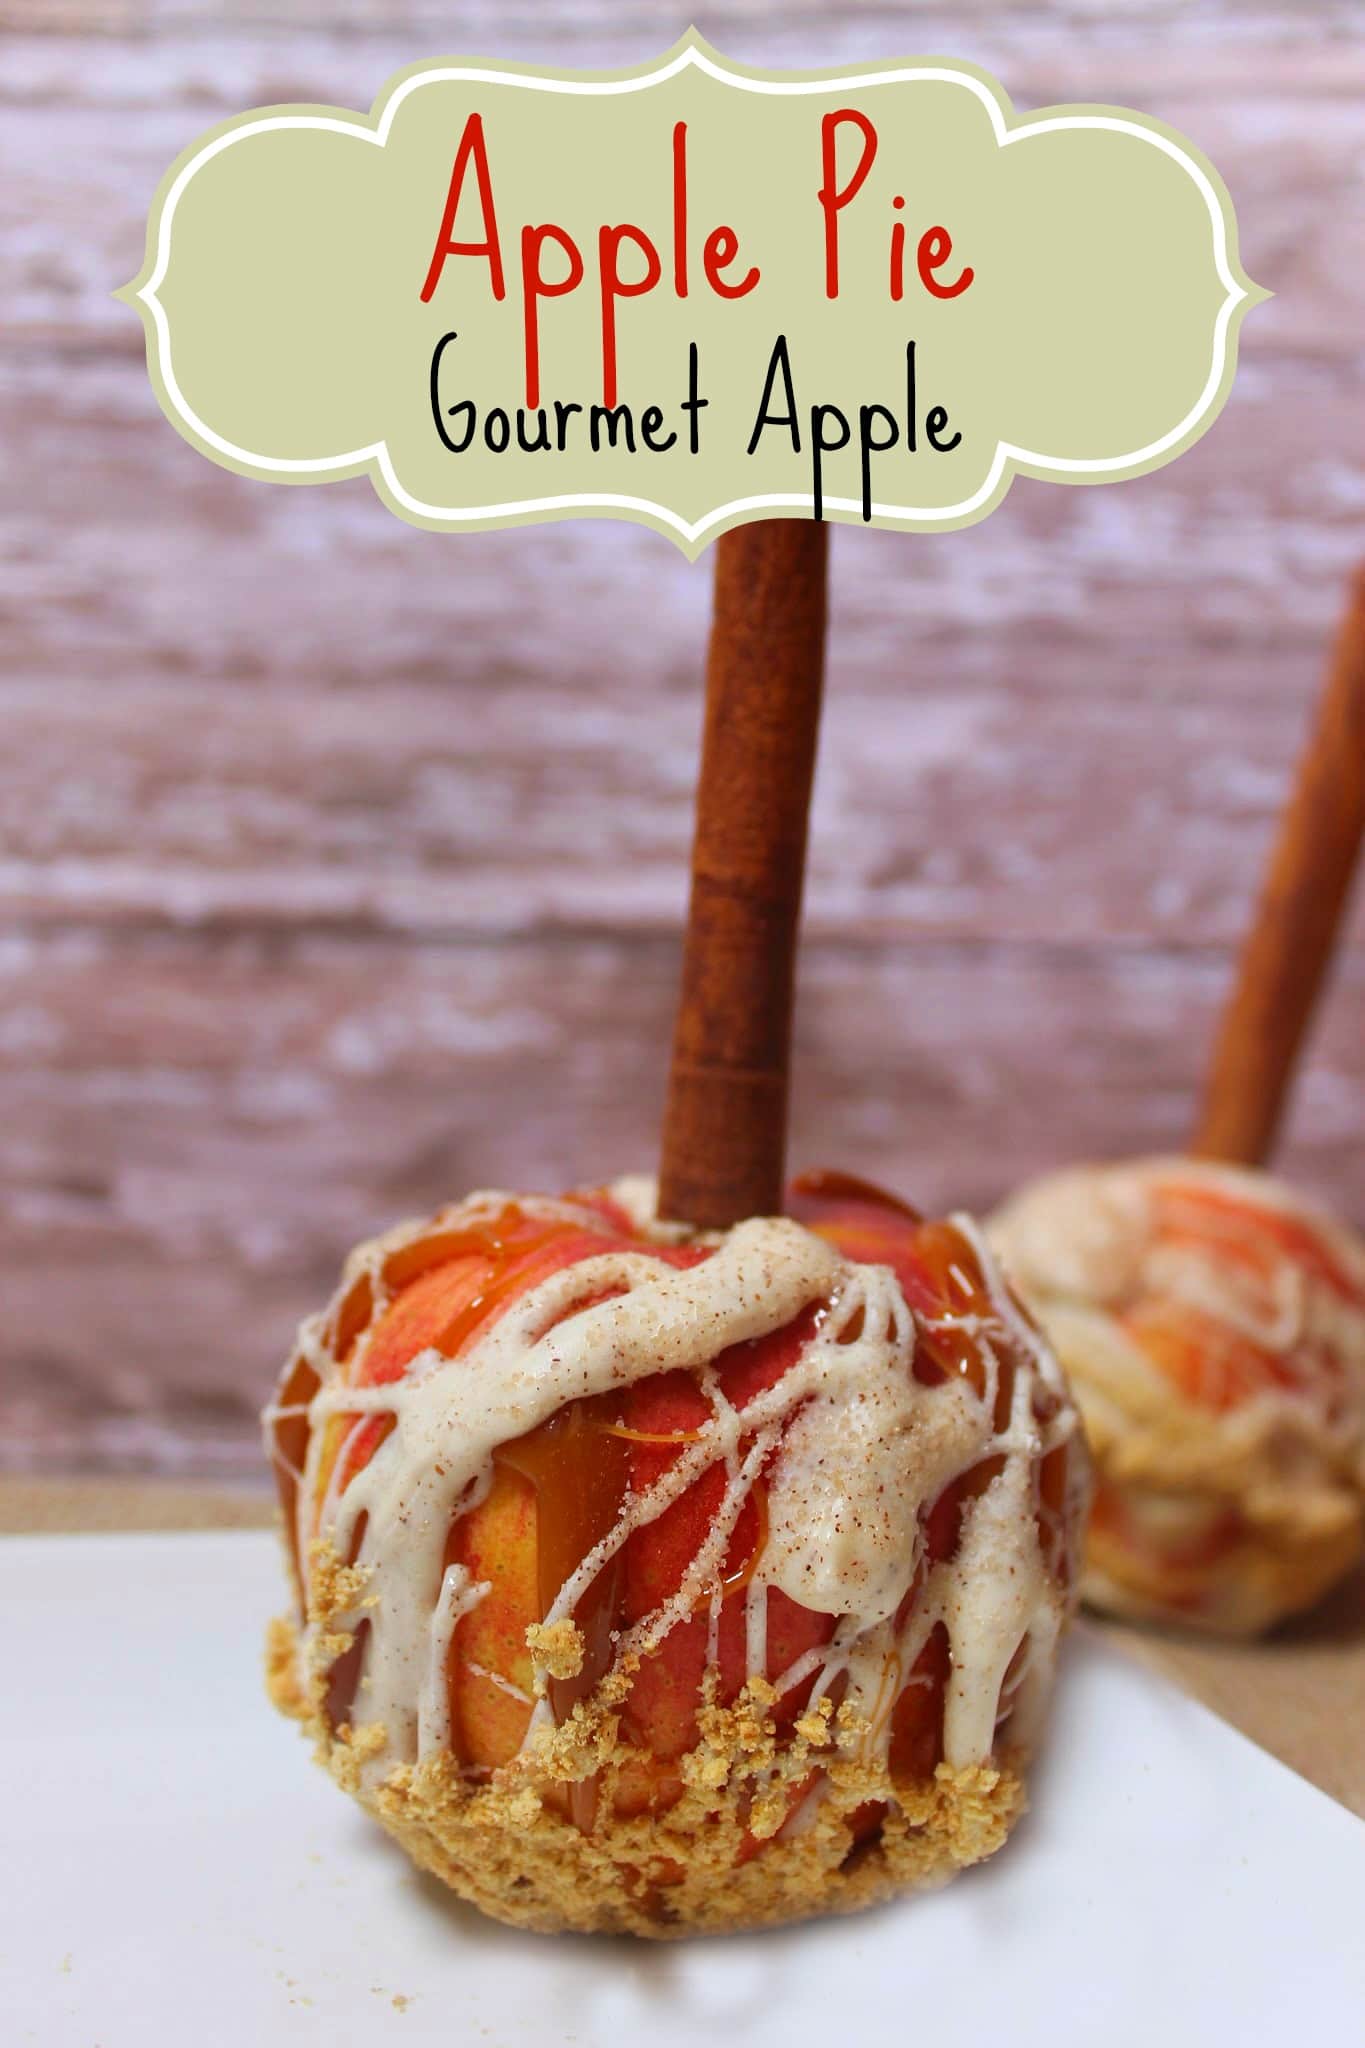 Apple Pie Caramel Apple - A Gourmet Caramel Apple Recipe. A delicious variation on traditional caramel apples with white chocolate and apple pie spice.